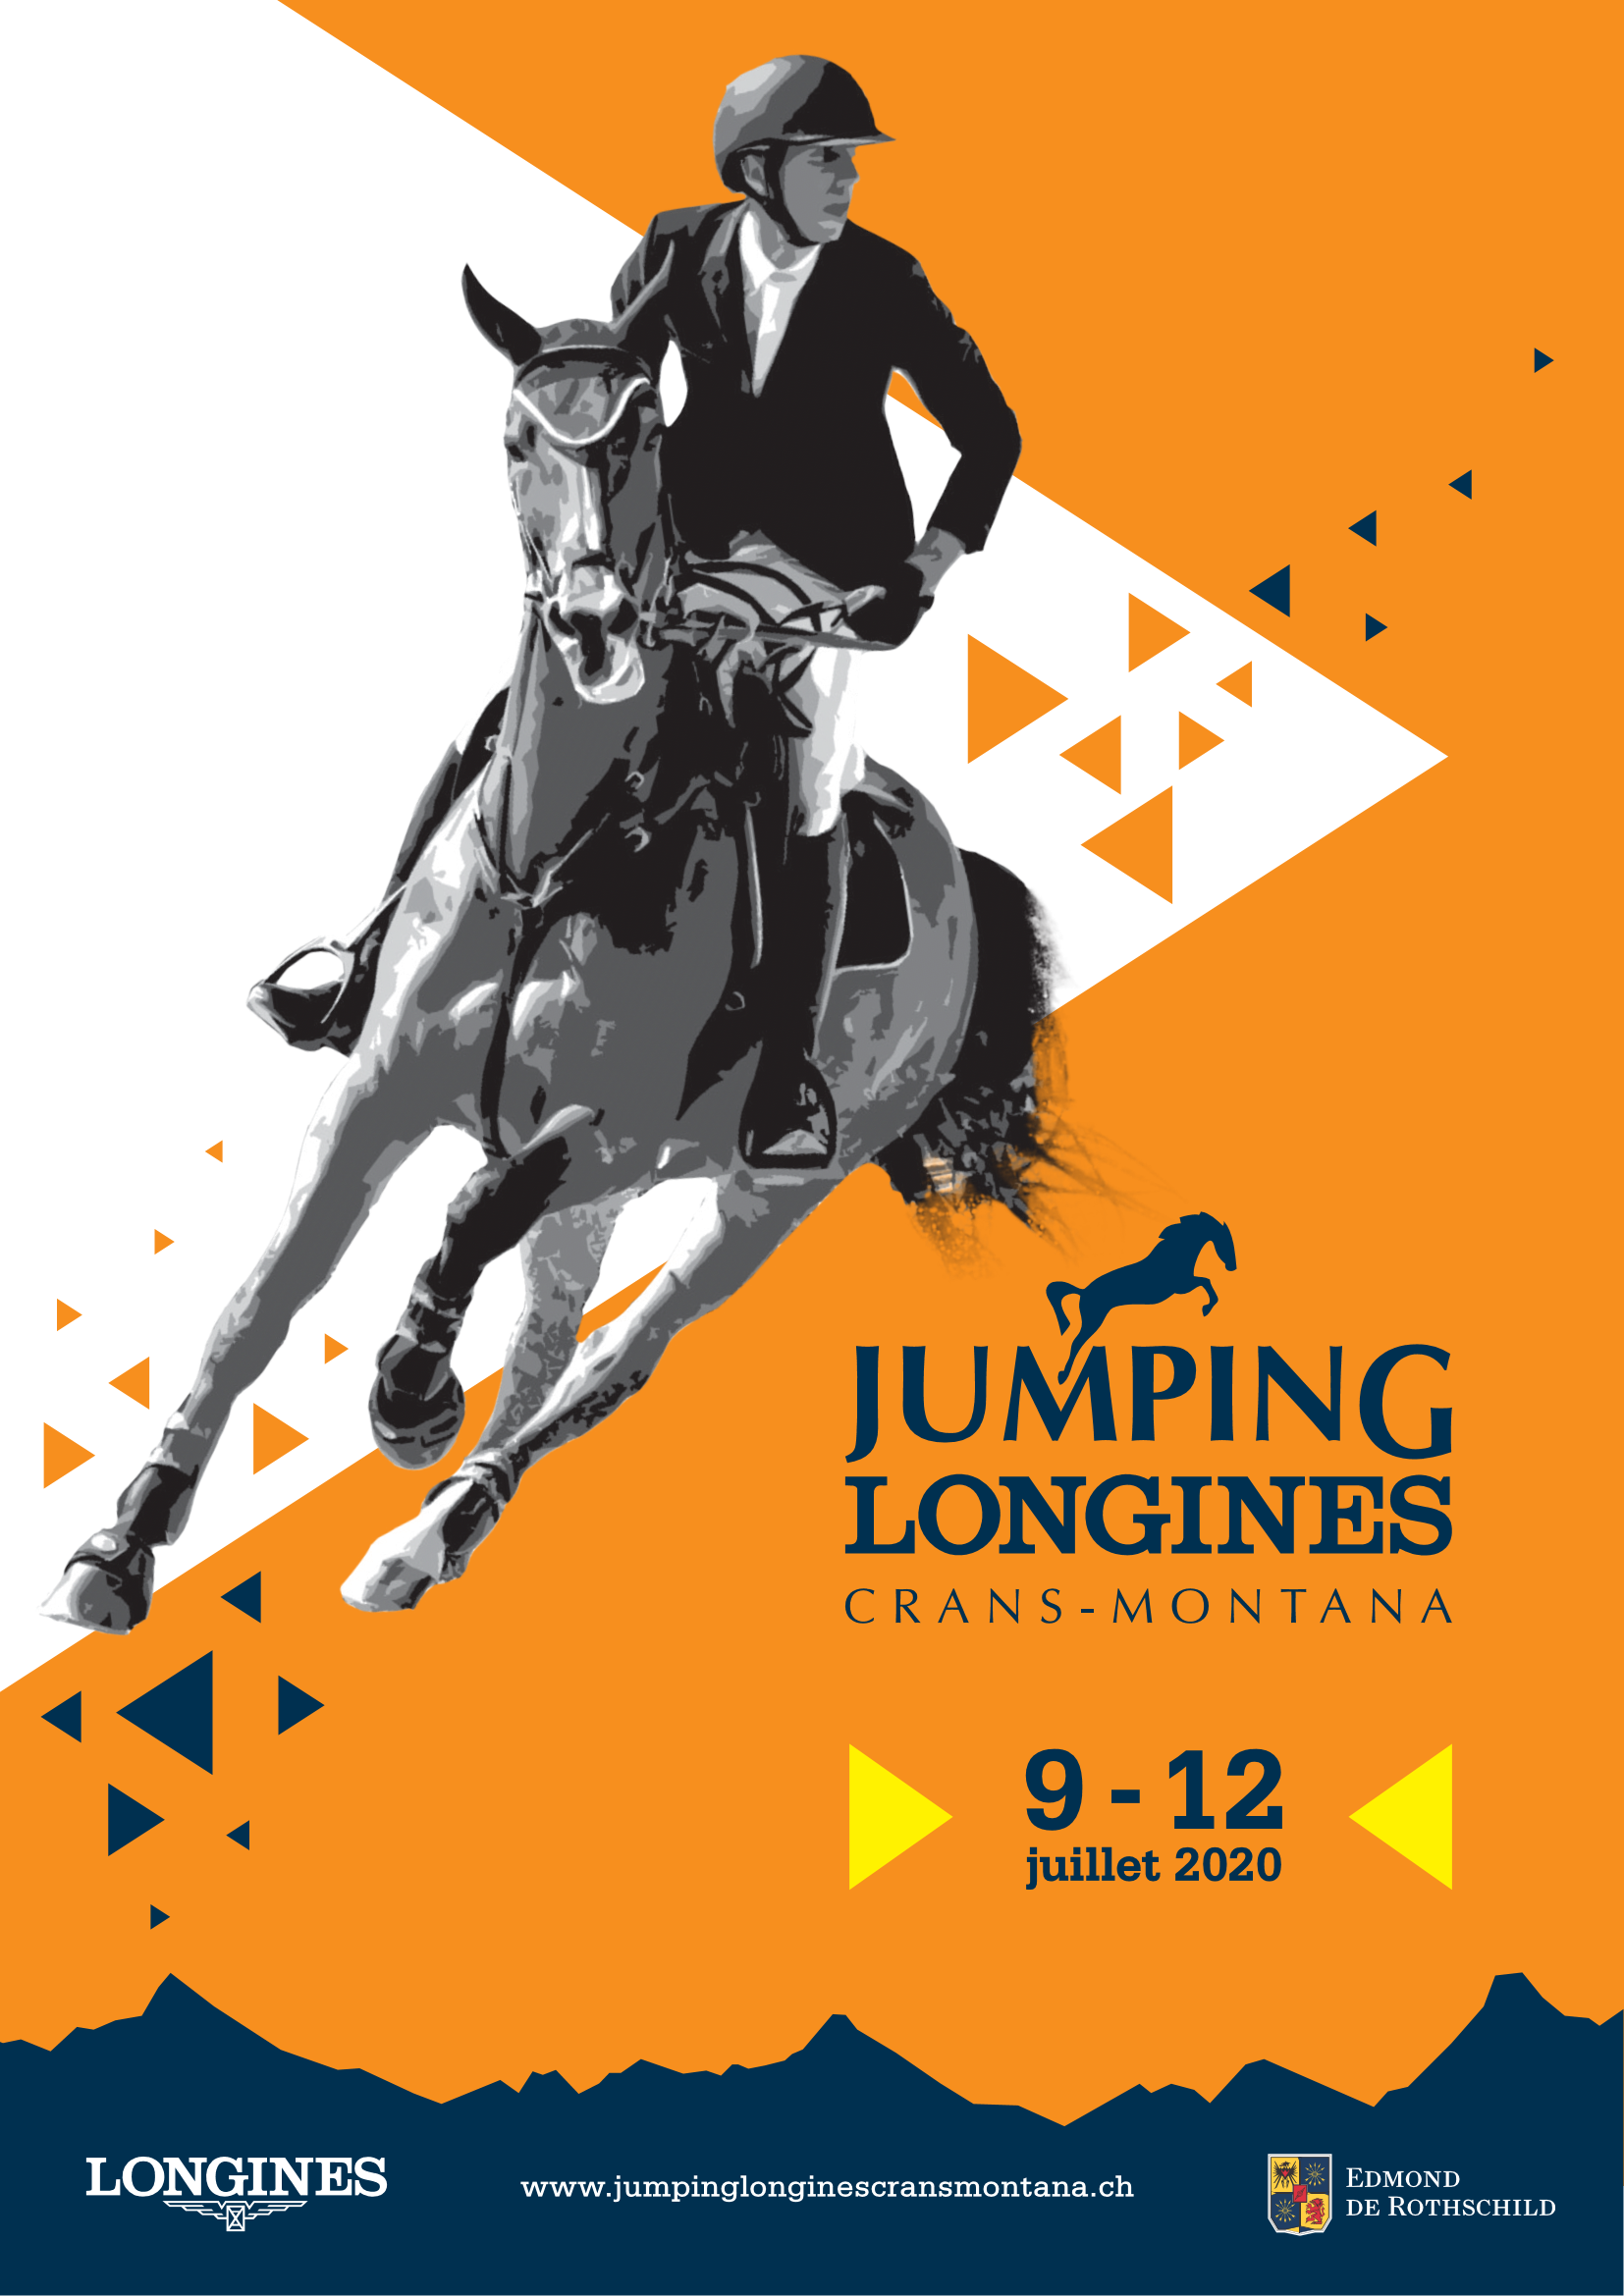 Jumping Longines Crans-Montana won't take place this year